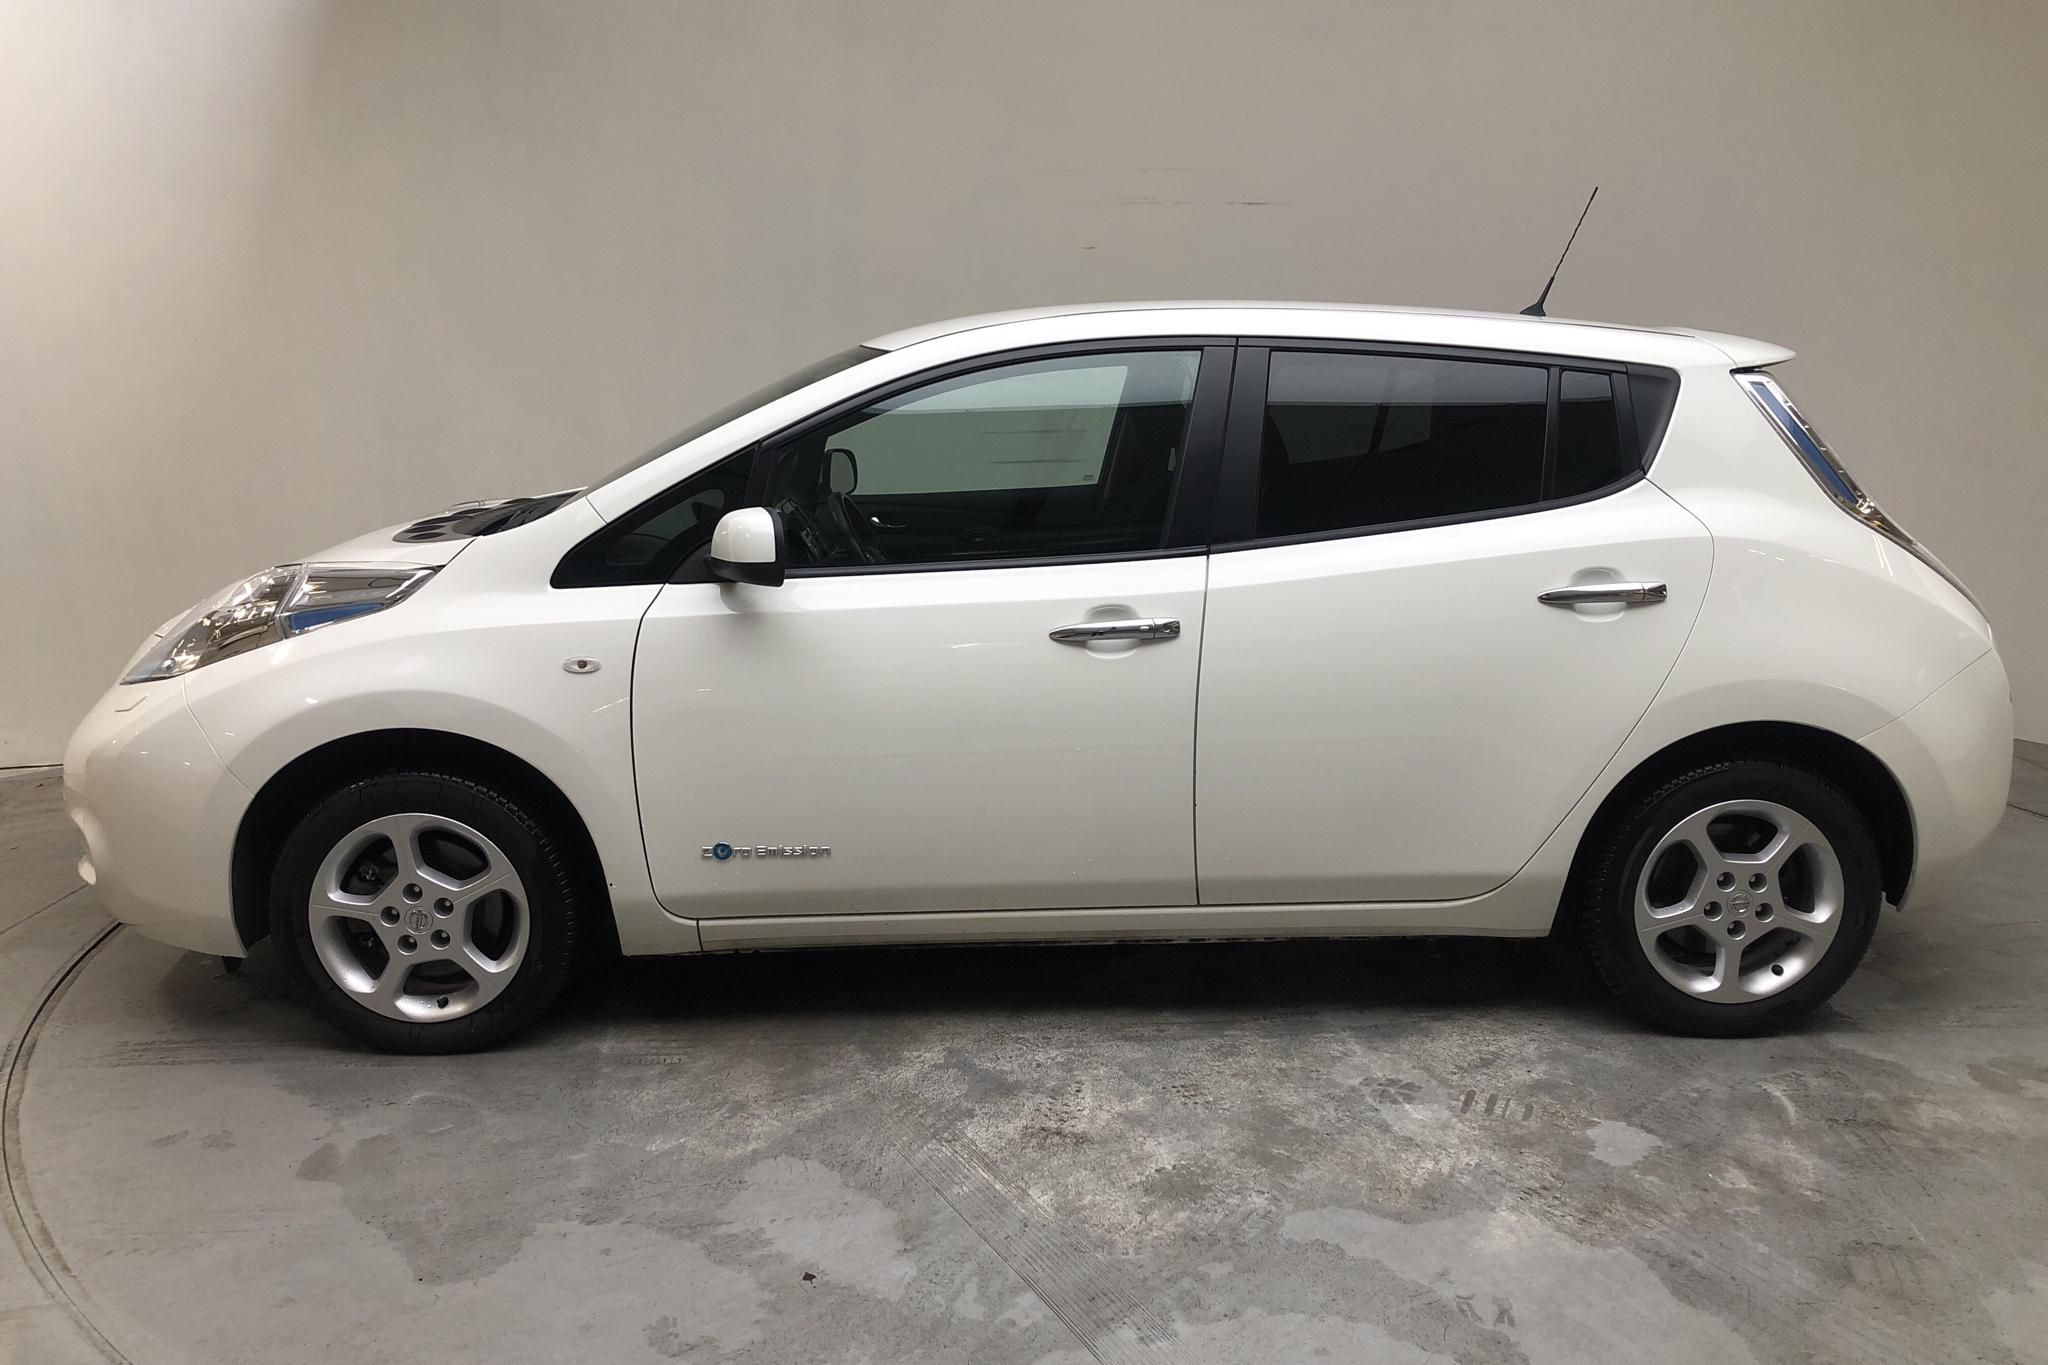 Nissan LEAF 24 KWH 5dr (109hk) - 45 330 km - Automatic - white - 2016